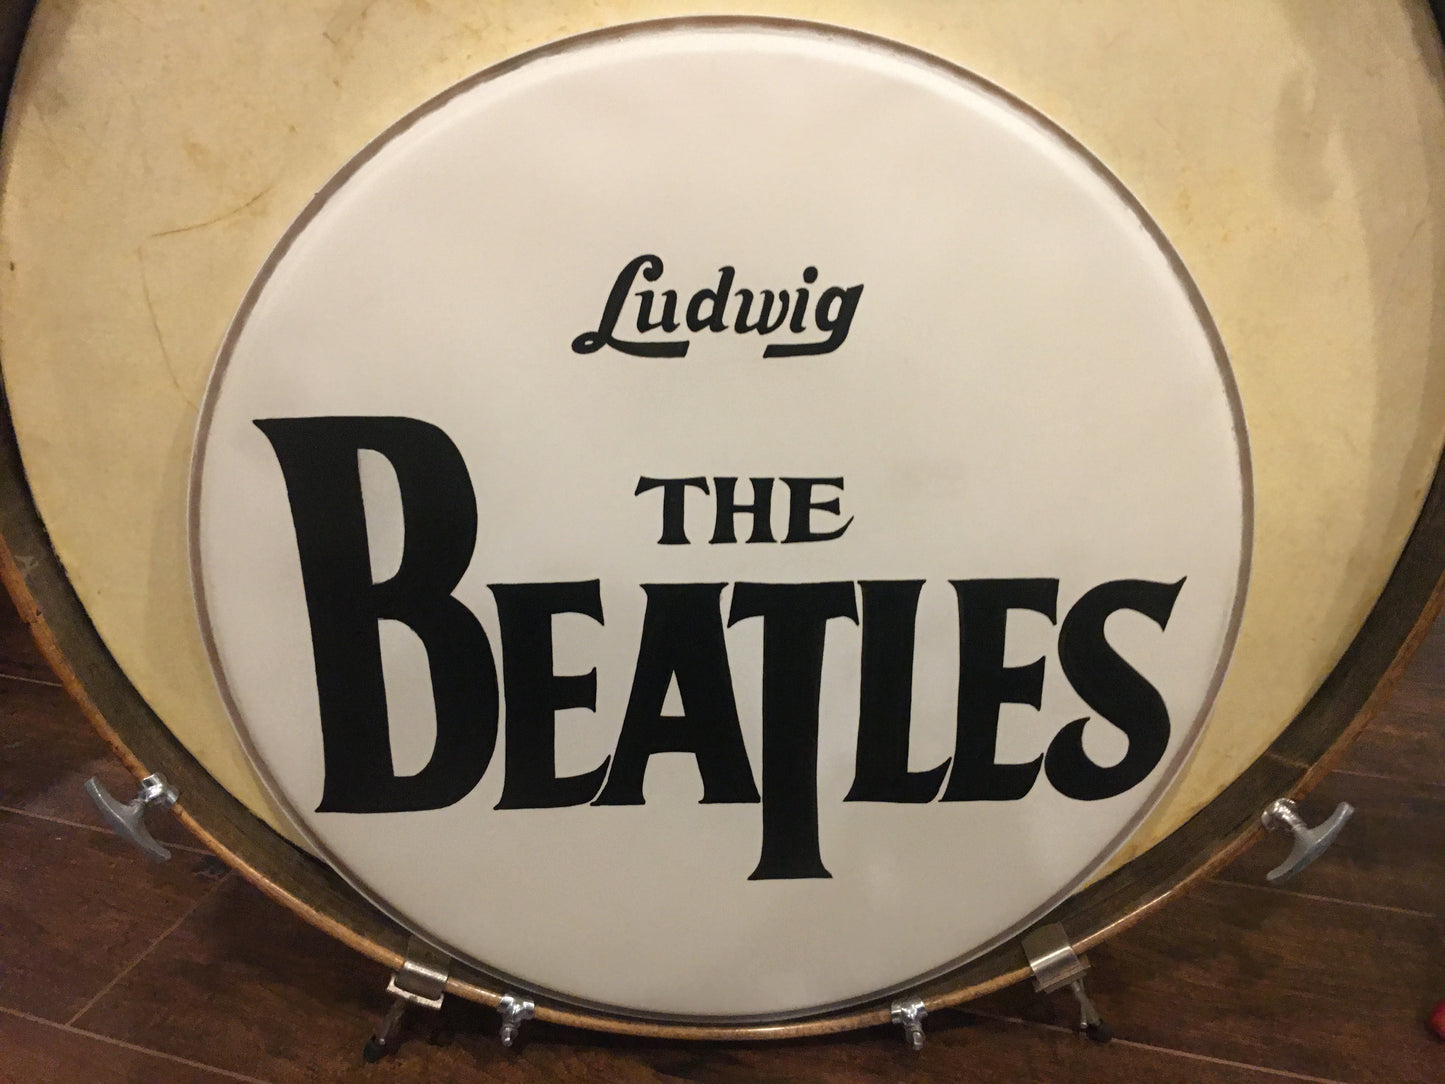 20" Ludwig The Beatles Drum Head Professionally Hand Painted by Artist - Down Beat